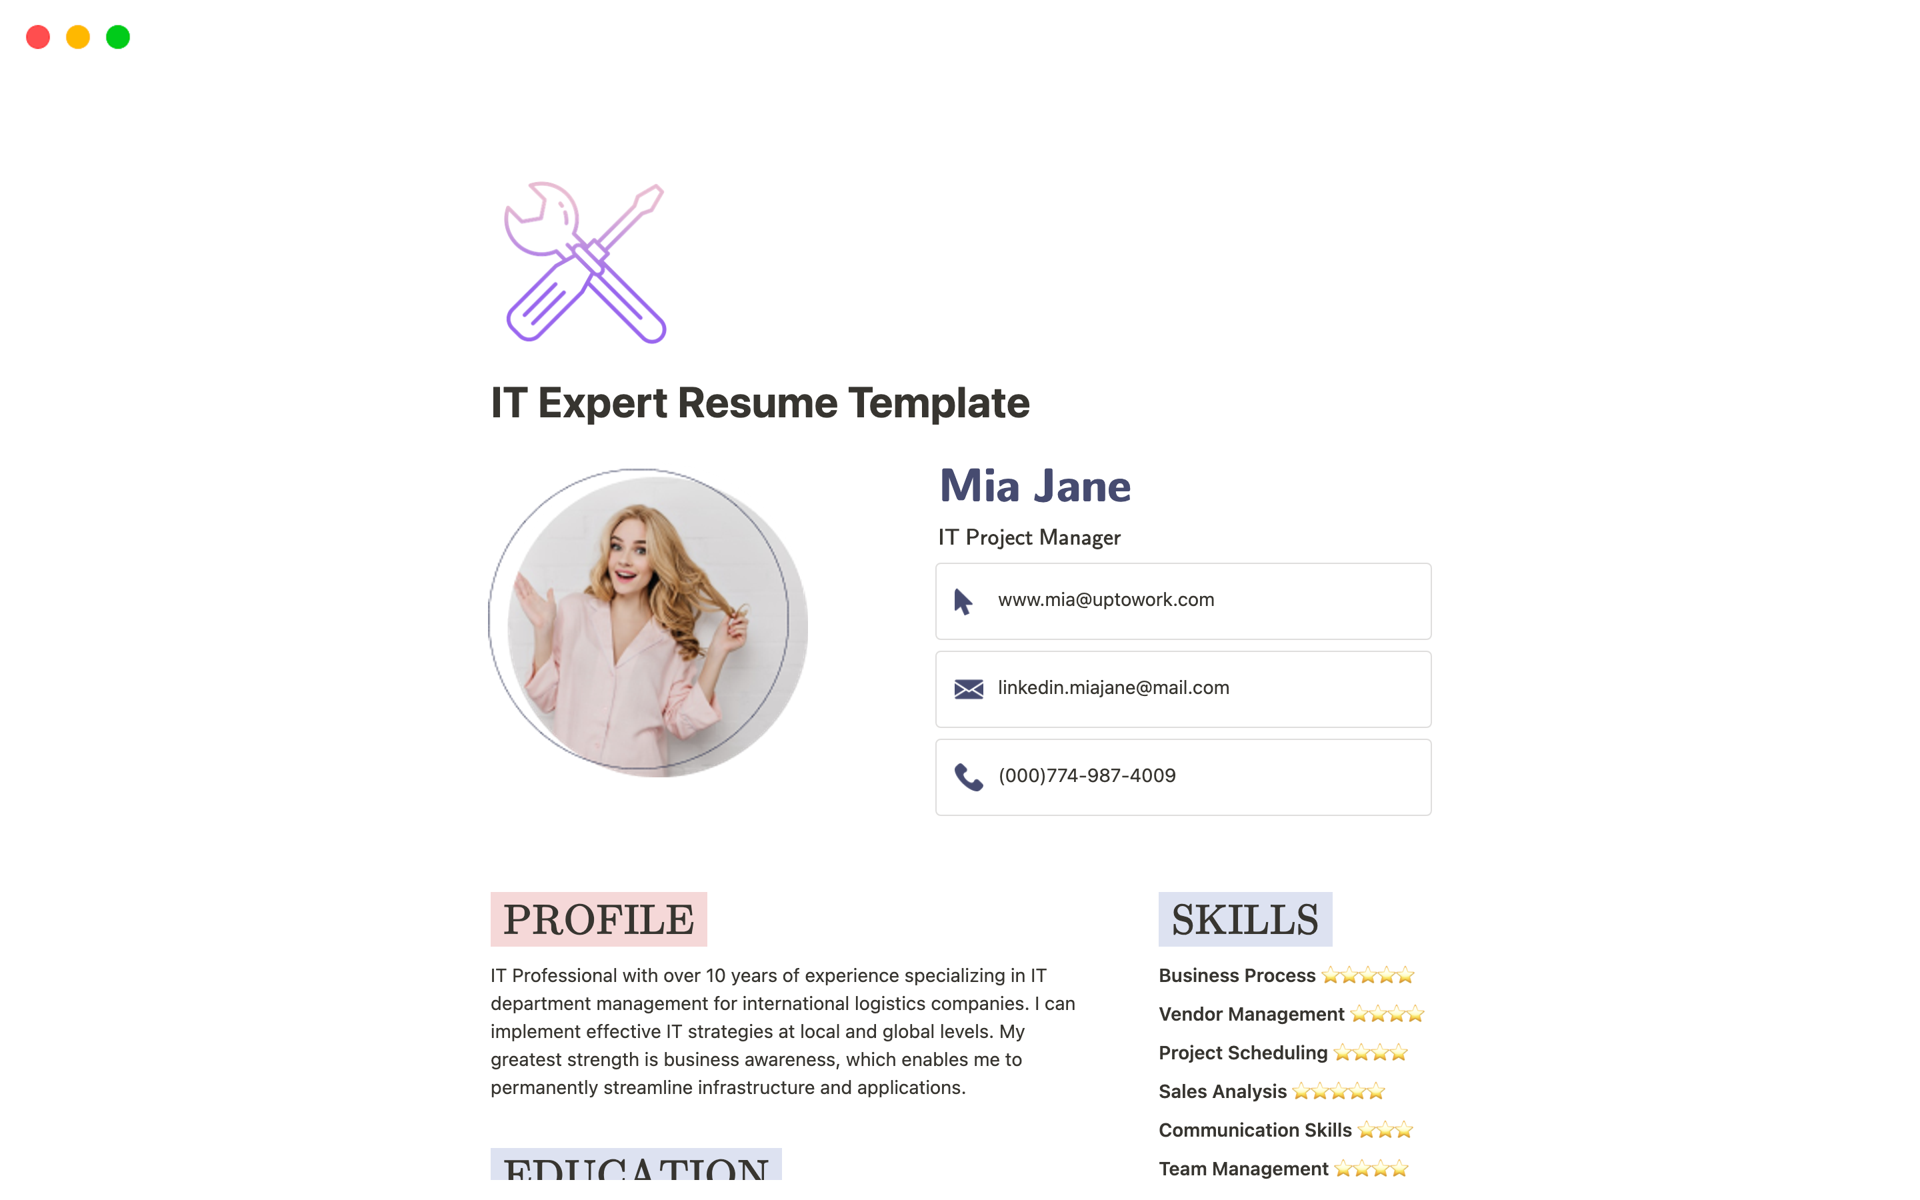 A template preview for IT Expert Resume